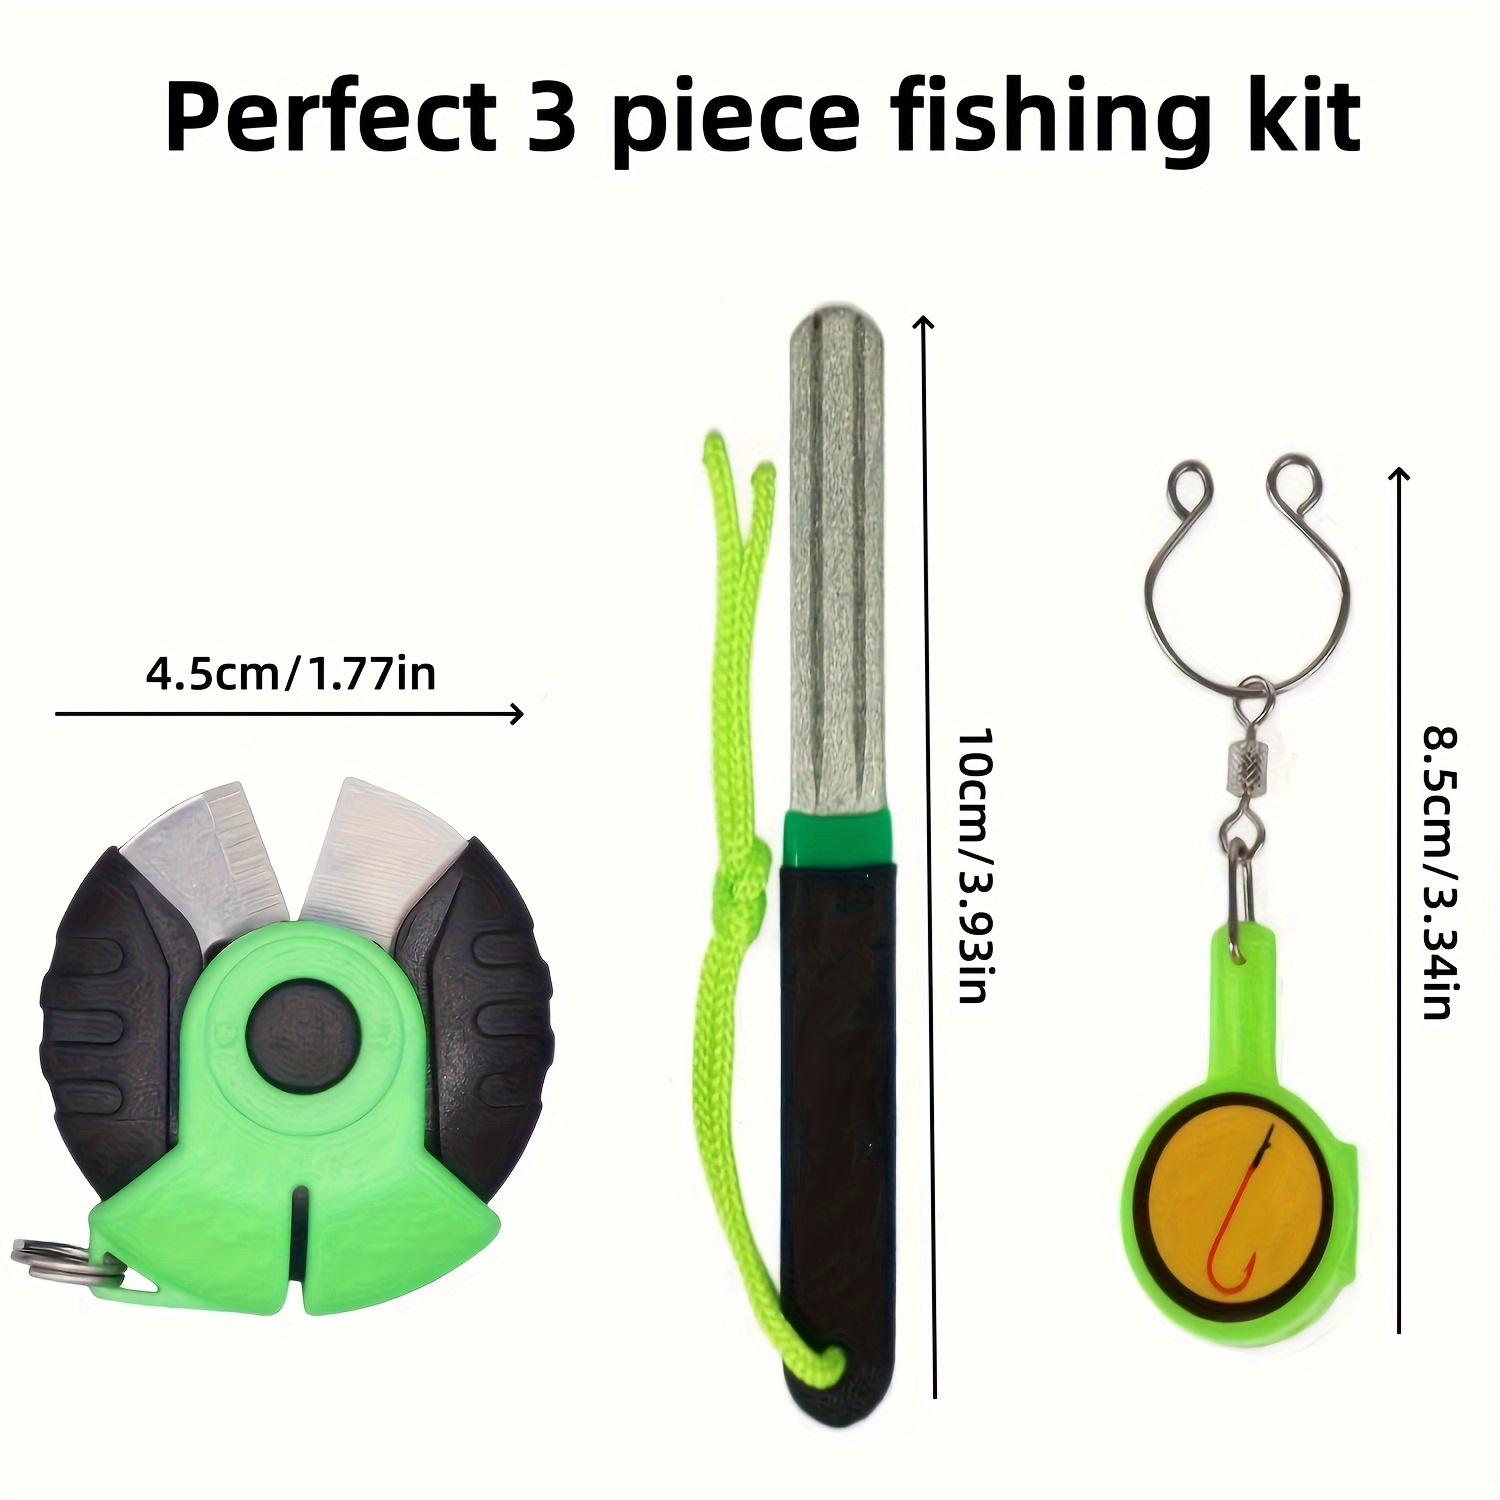 3-piece Green Fishing Set - Fish Hook Sharpening Tool, Fishing Knot Tool,  And Fishing Line Cutter. The Perfect Fishing Gear Combination For Fly Fishin